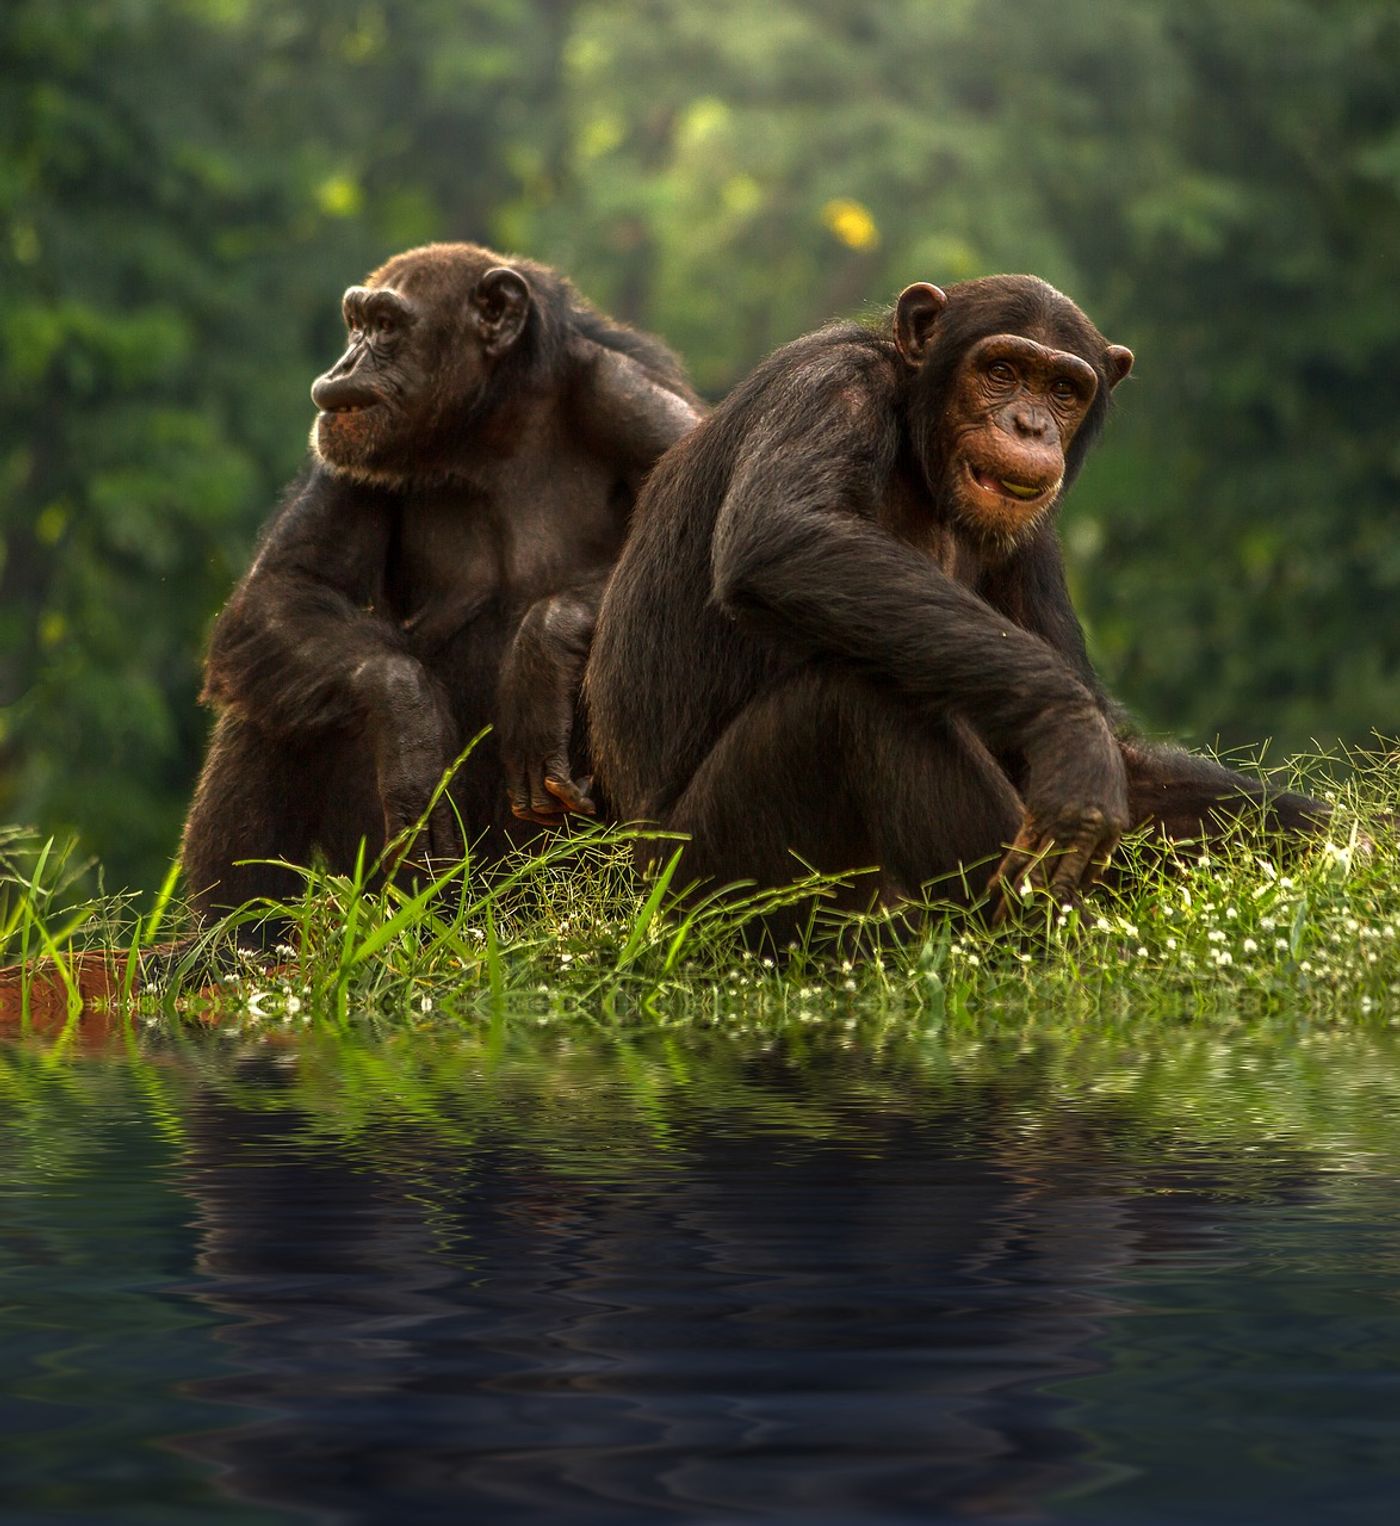 Chimpanzees tap into the power of the "Cuddle Hormone" to band together during acts of war, just like humans do.